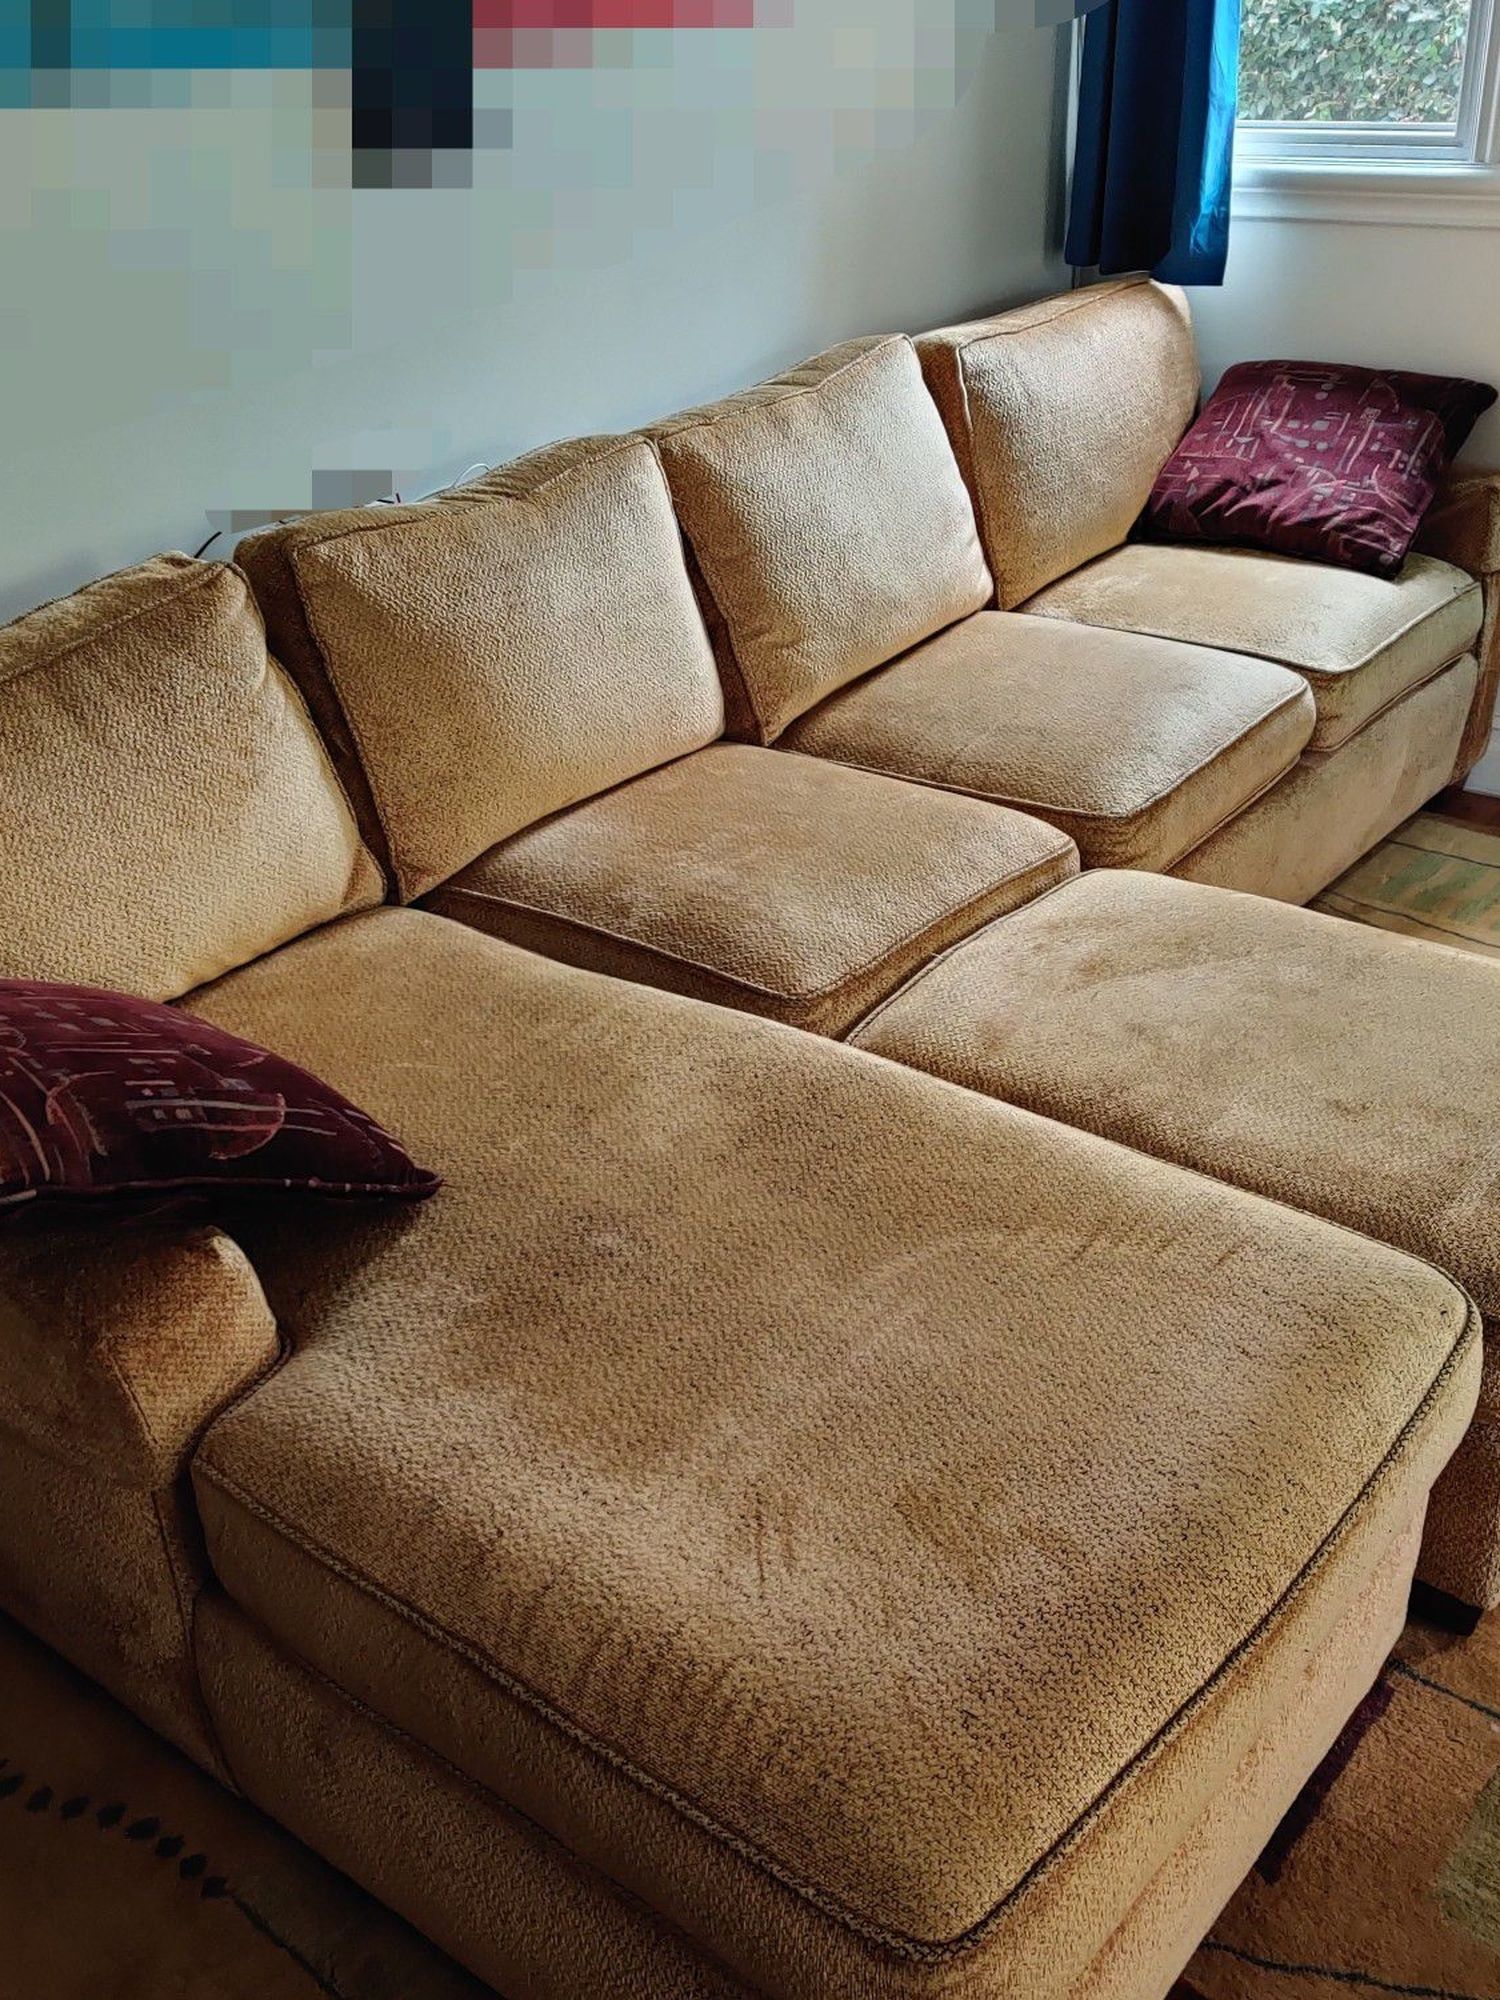 Large Sectional Couch with ottoman and throw pillows